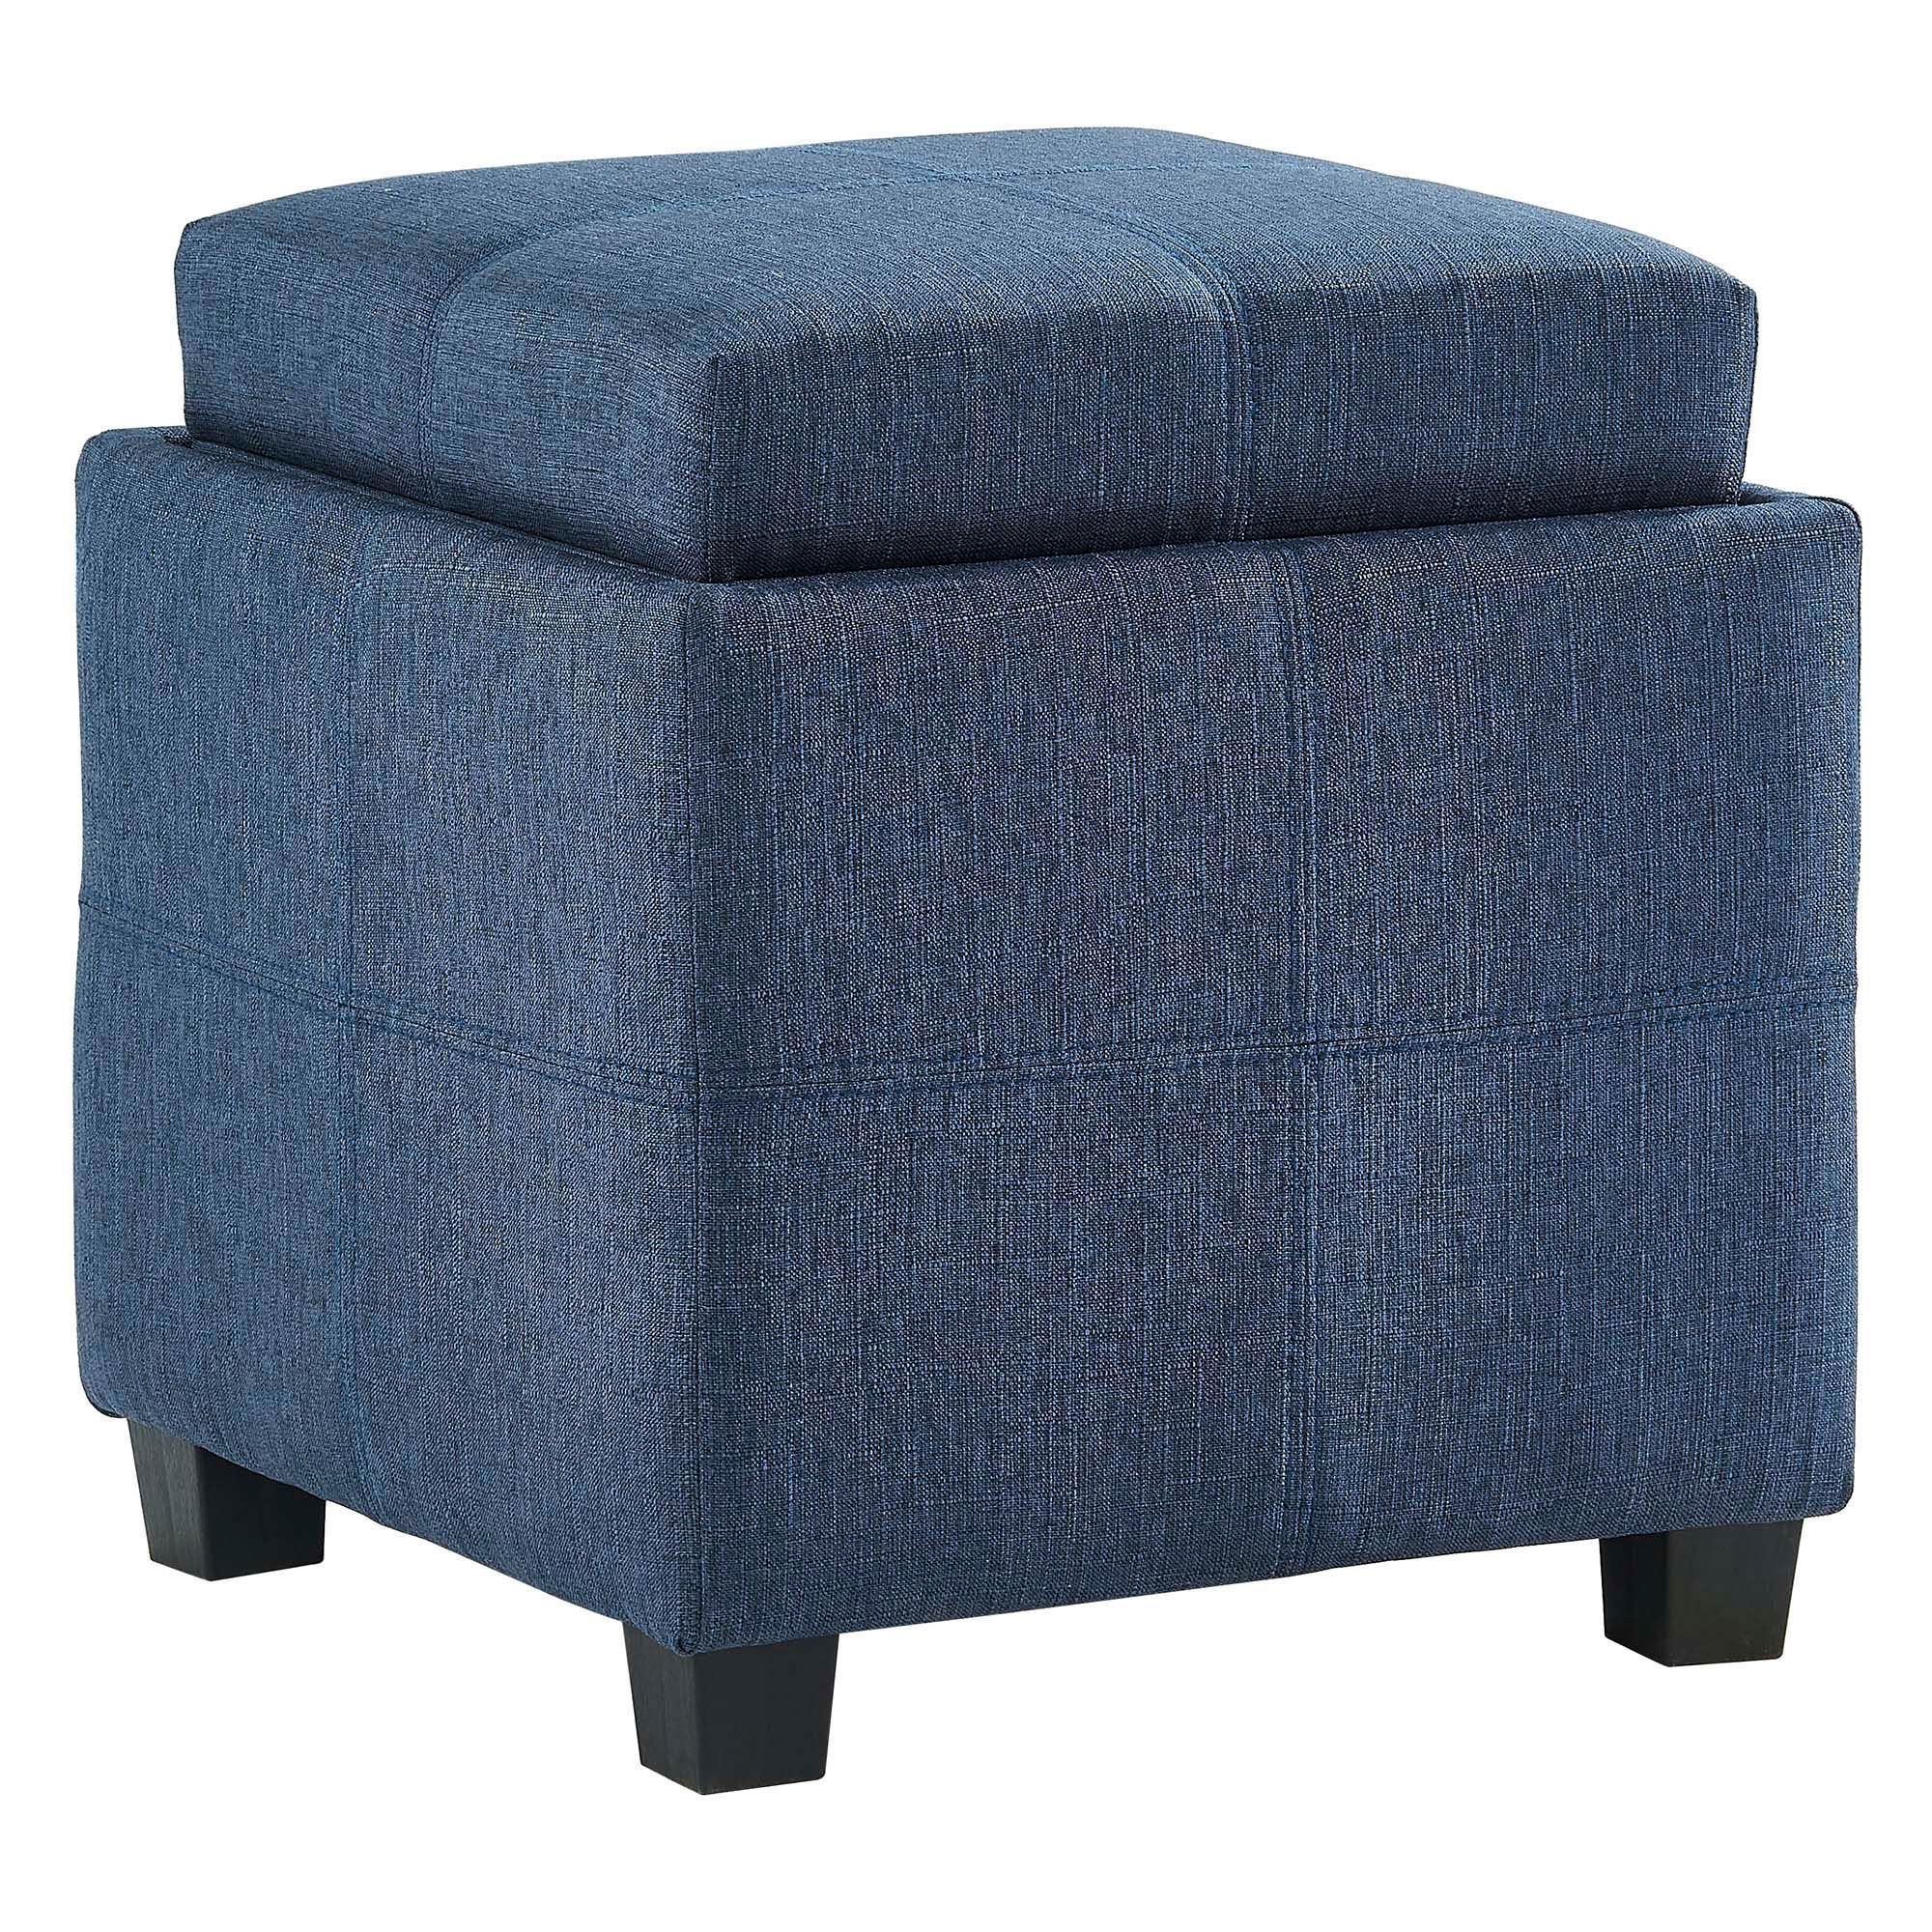 Fashionable 19" Blue And Gray Transitional Square Storage Ottoman With Reversible Throughout Square Cube Ottomans (View 2 of 10)